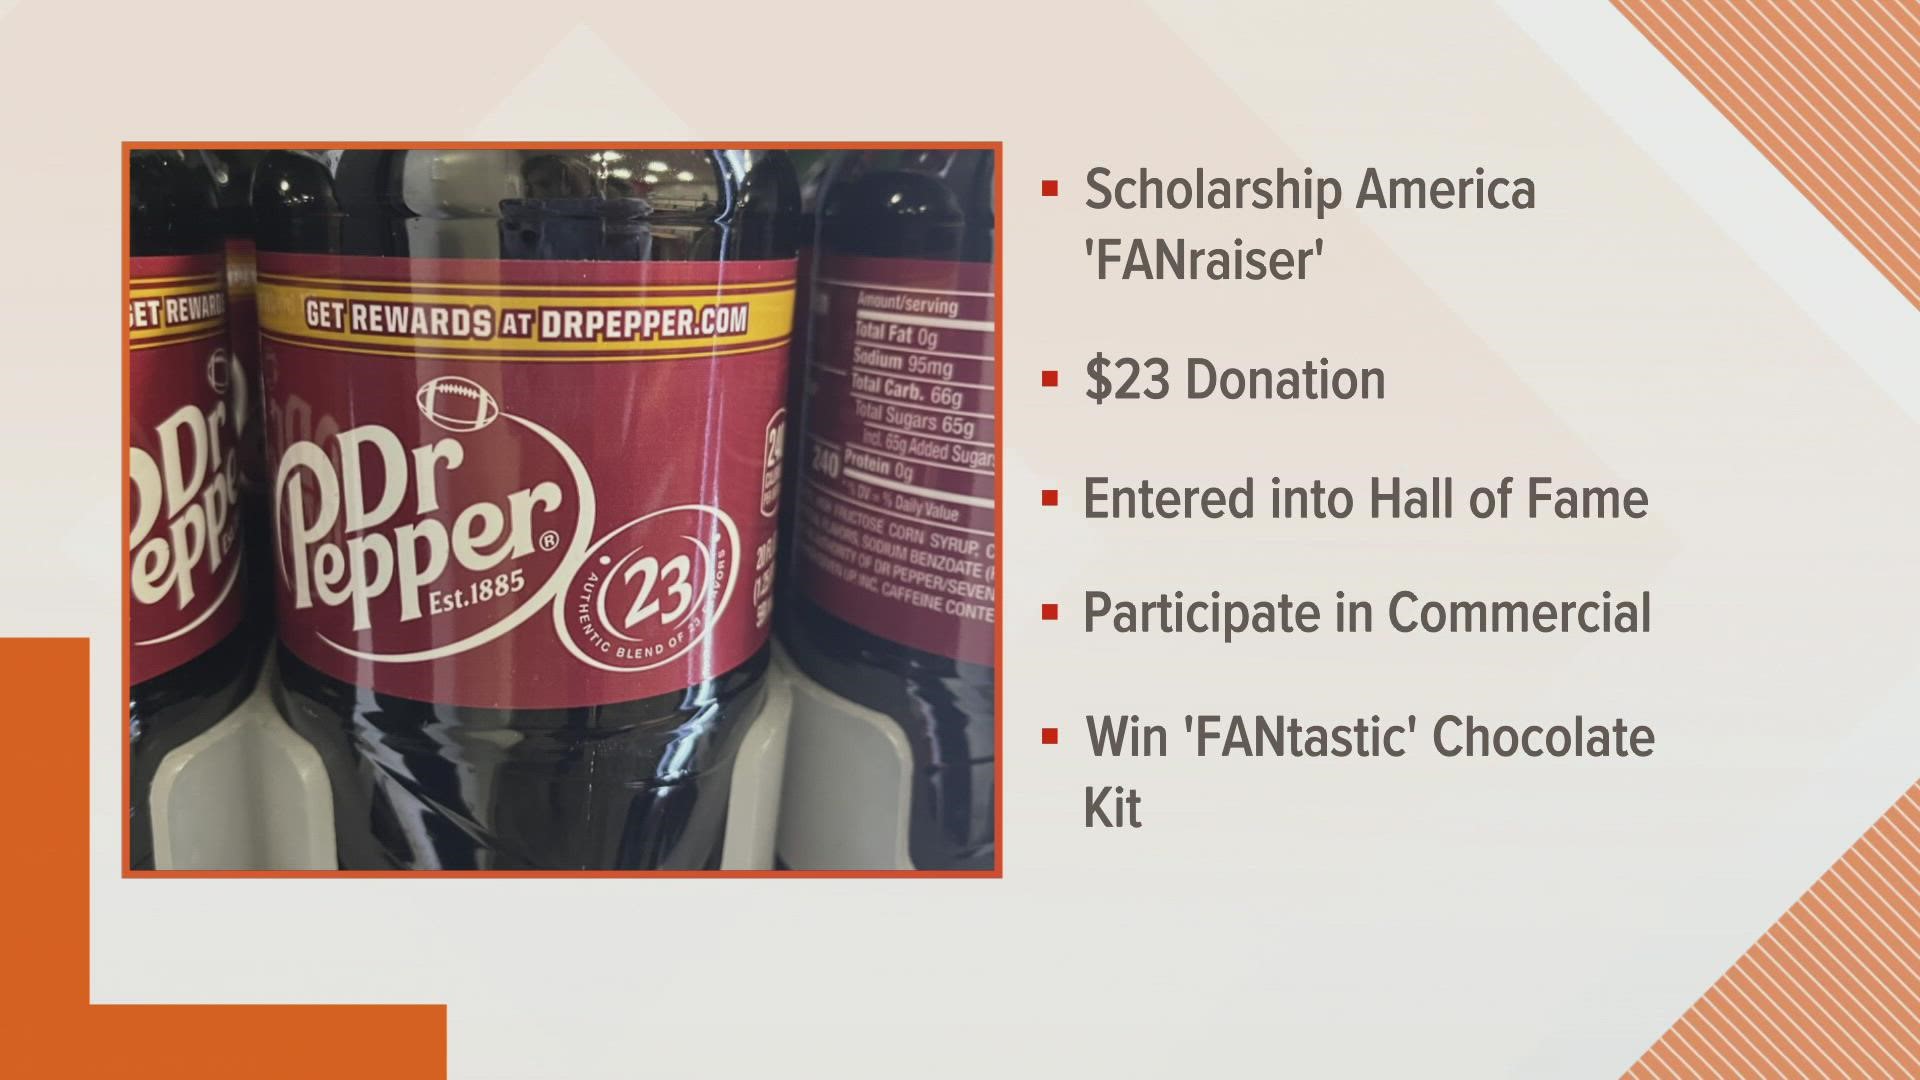 Tuesday, Nov. 23 is the last day to enter the sweepstakes with a $23 donation.